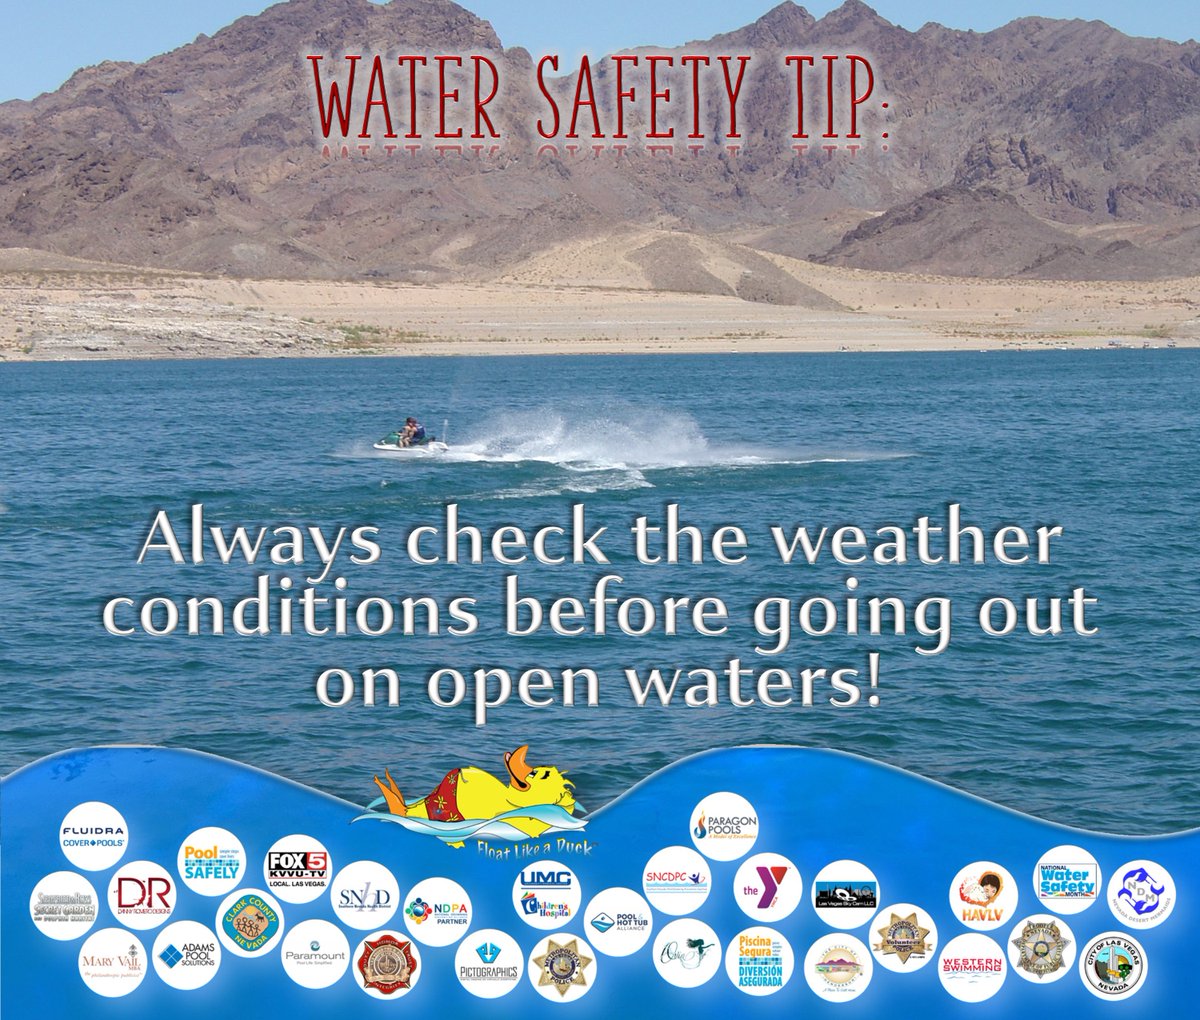 RT NWSVegas: RT @Duckieparagon: Always check the weather conditions before going out 
on open waters! #boating #waterskiing #jetskis #watersafetymonth #watersafetytips #openwaters #checktheweather #floatlikeaduck @NWSVegas @LakeMeadNPS_  @tedpretty @Cass…